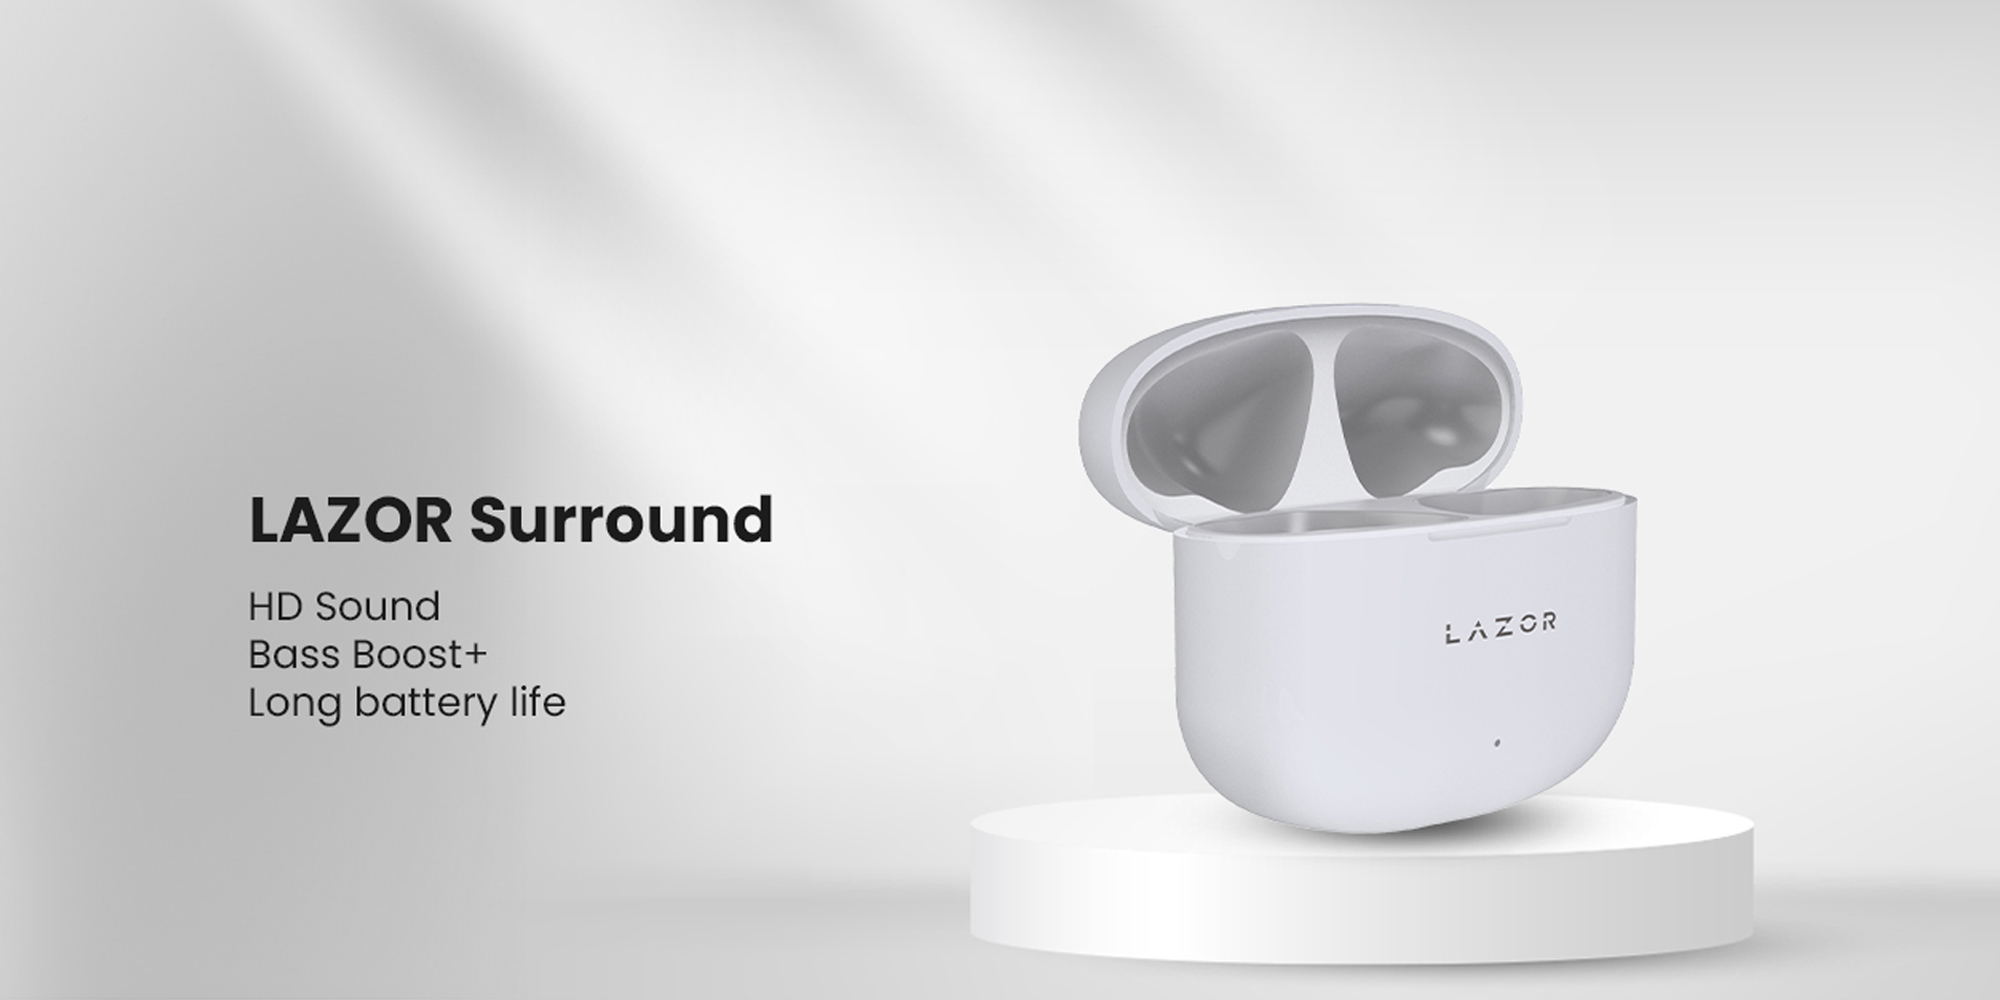 Lazor Surround EA227: TWS In-Ear Earphones with Light and Compact Design, HD Sound, Touch Control, BT V5.0, Bass Boost+, Type-C Charging - White